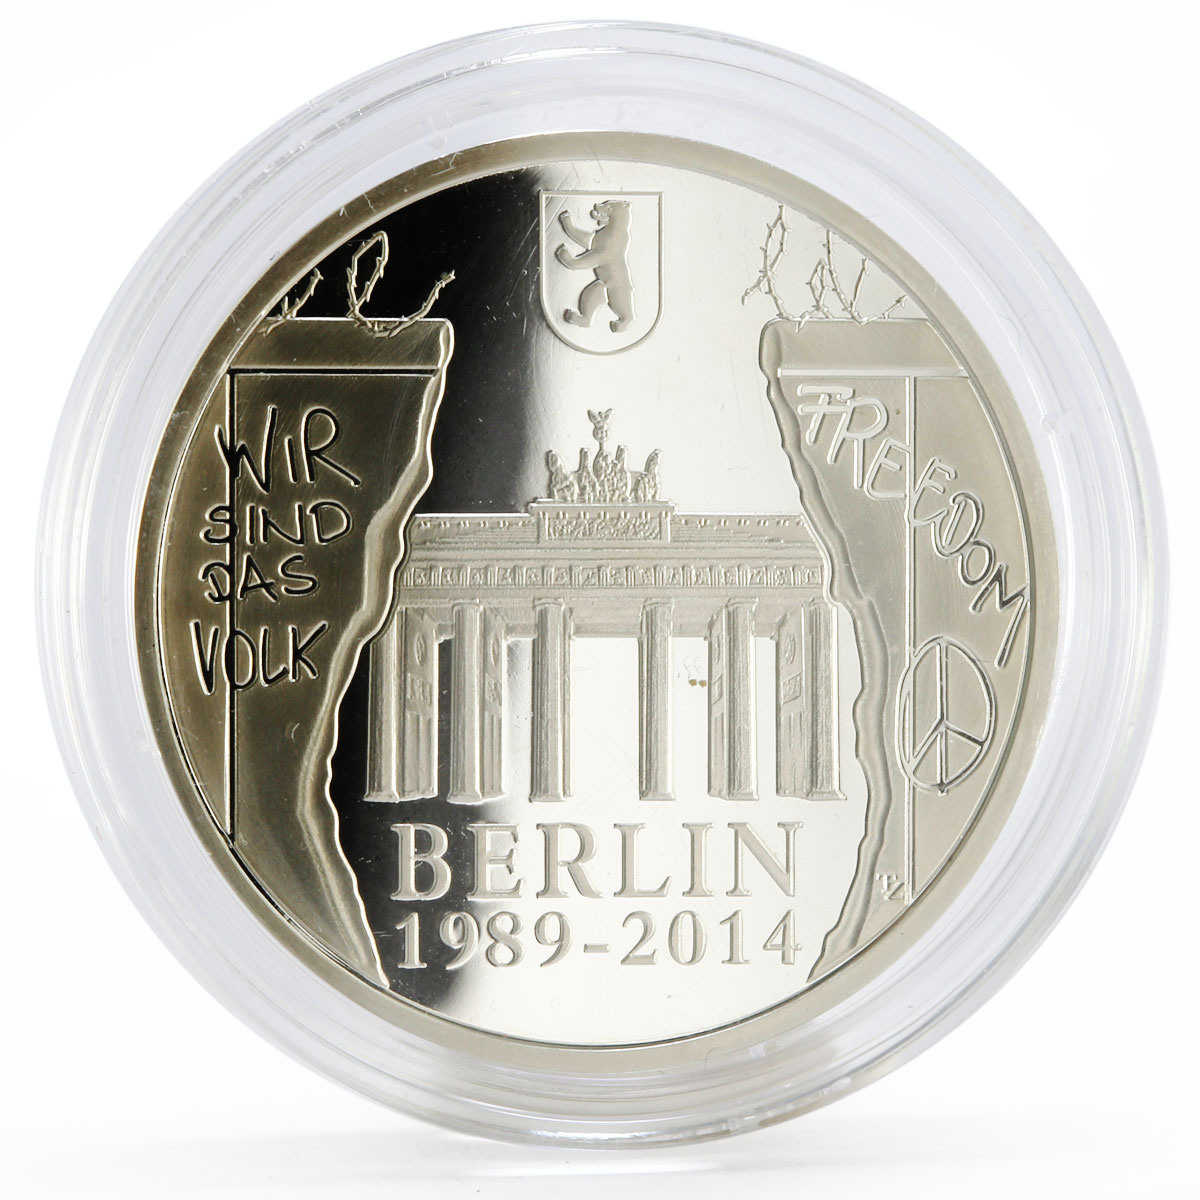 Belgium 20 euro 25th Anniversary of the Fall of the Berlin Wall silver coin 2014